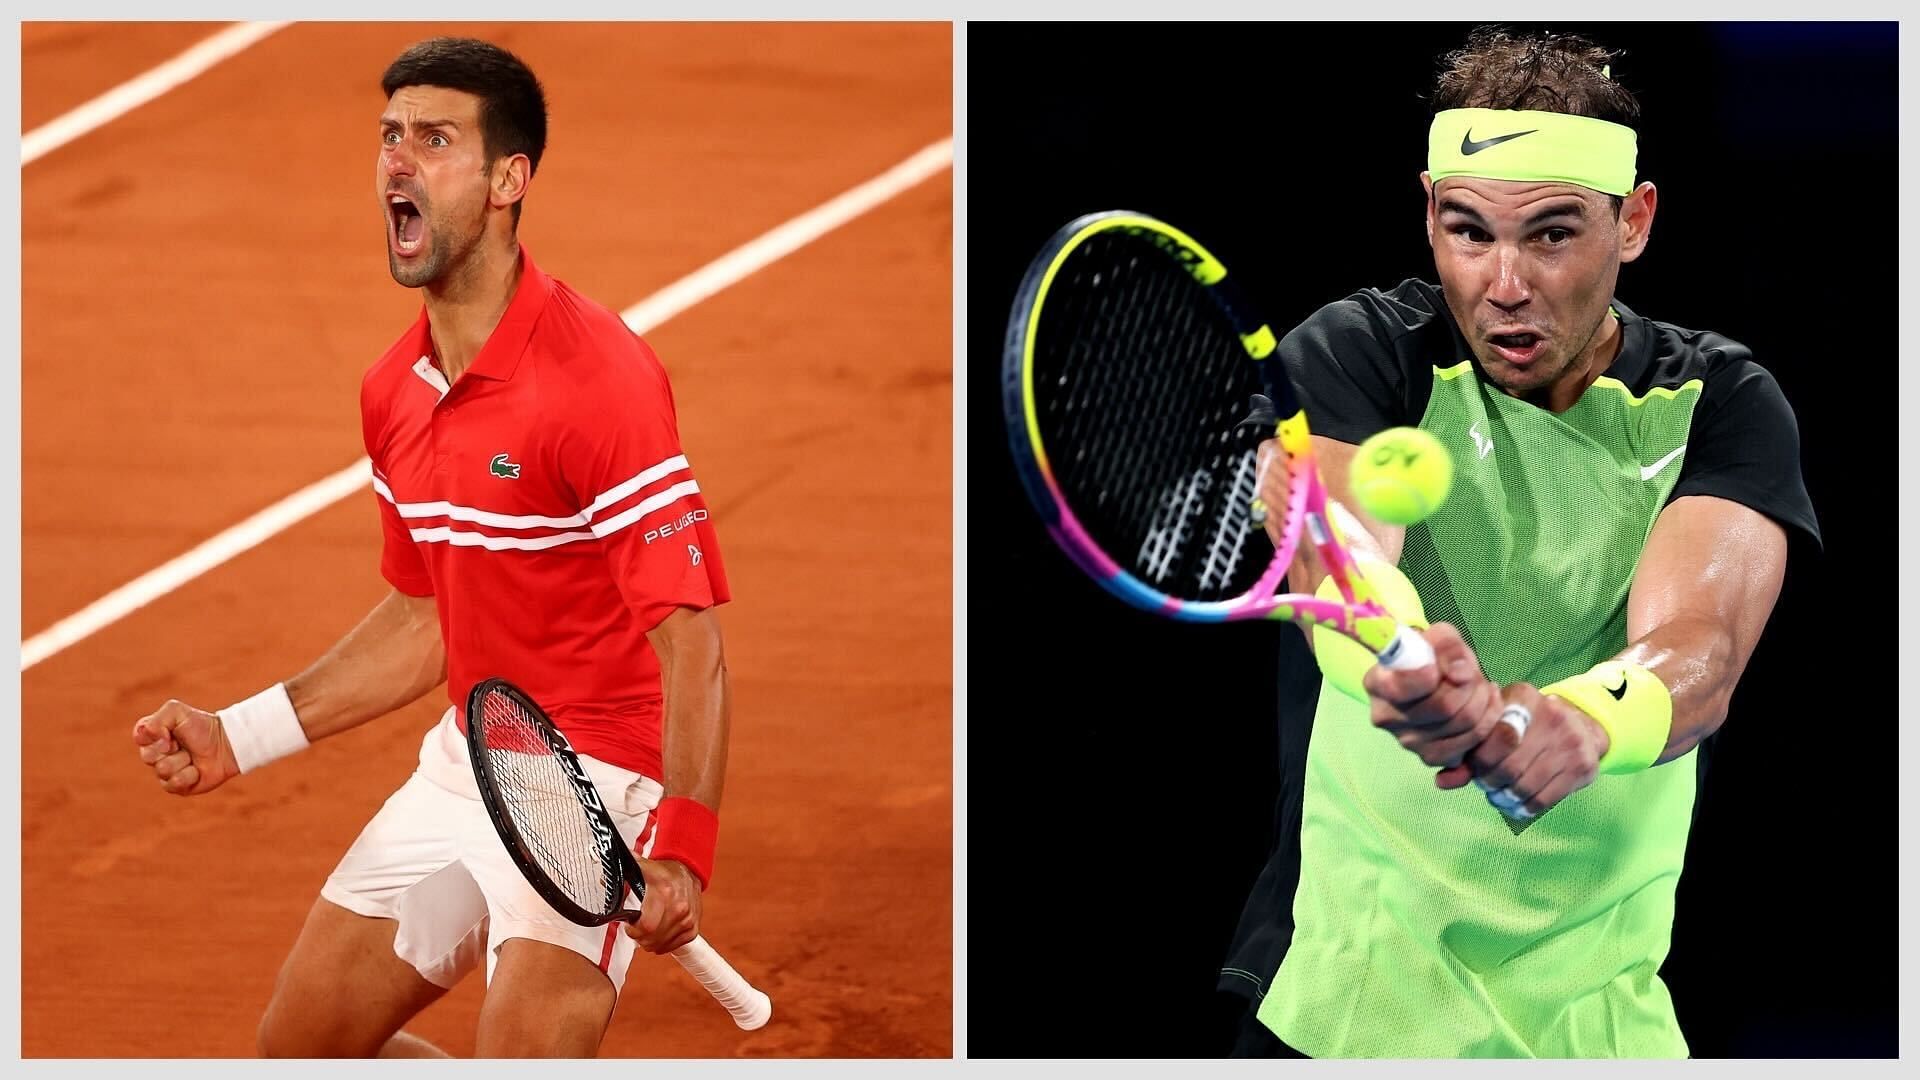 Novak Djokovic vs Rafael Nadal: Who leads the Masters 1000 title race after the Paris Masters?